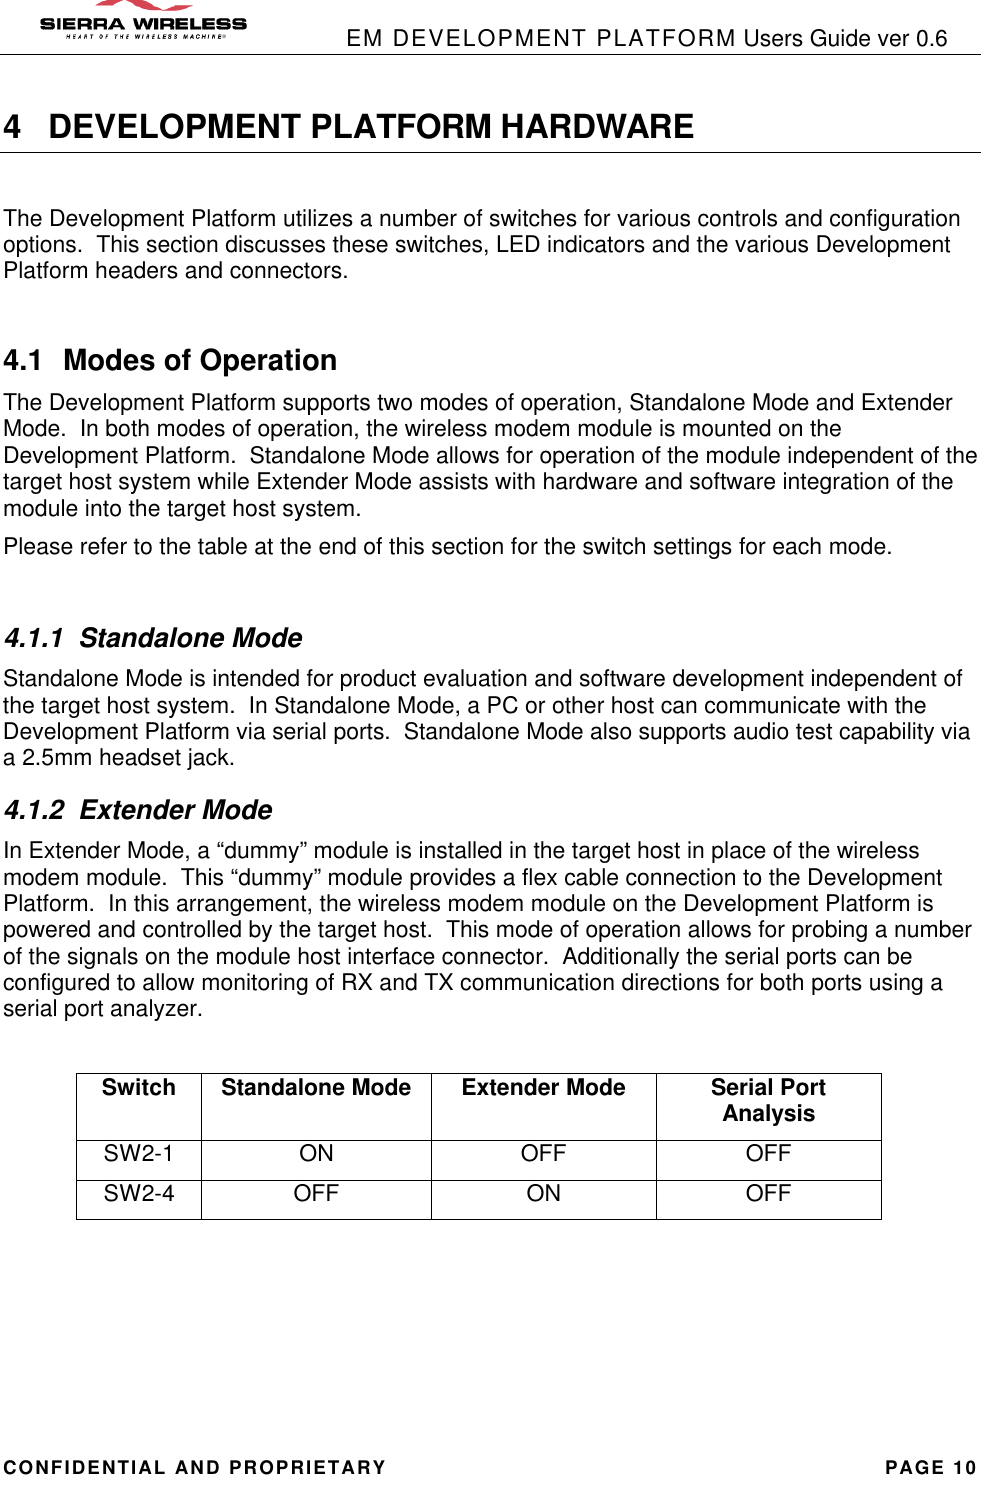            EM DEVELOPMENT PLATFORM Users Guide ver 0.6 CONFIDENTIAL AND PROPRIETARY PAGE 10 4 DEVELOPMENT PLATFORM HARDWARE  The Development Platform utilizes a number of switches for various controls and configuration options.  This section discusses these switches, LED indicators and the various Development Platform headers and connectors.  4.1 Modes of Operation The Development Platform supports two modes of operation, Standalone Mode and Extender Mode.  In both modes of operation, the wireless modem module is mounted on the Development Platform.  Standalone Mode allows for operation of the module independent of the target host system while Extender Mode assists with hardware and software integration of the module into the target host system. Please refer to the table at the end of this section for the switch settings for each mode.  4.1.1 Standalone Mode Standalone Mode is intended for product evaluation and software development independent of the target host system.  In Standalone Mode, a PC or other host can communicate with the Development Platform via serial ports.  Standalone Mode also supports audio test capability via a 2.5mm headset jack.   4.1.2 Extender Mode In Extender Mode, a “dummy” module is installed in the target host in place of the wireless modem module.  This “dummy” module provides a flex cable connection to the Development Platform.  In this arrangement, the wireless modem module on the Development Platform is powered and controlled by the target host.  This mode of operation allows for probing a number of the signals on the module host interface connector.  Additionally the serial ports can be configured to allow monitoring of RX and TX communication directions for both ports using a serial port analyzer.  Switch Standalone Mode Extender Mode Serial Port Analysis SW2-1 ON OFF OFF SW2-4 OFF ON OFF     